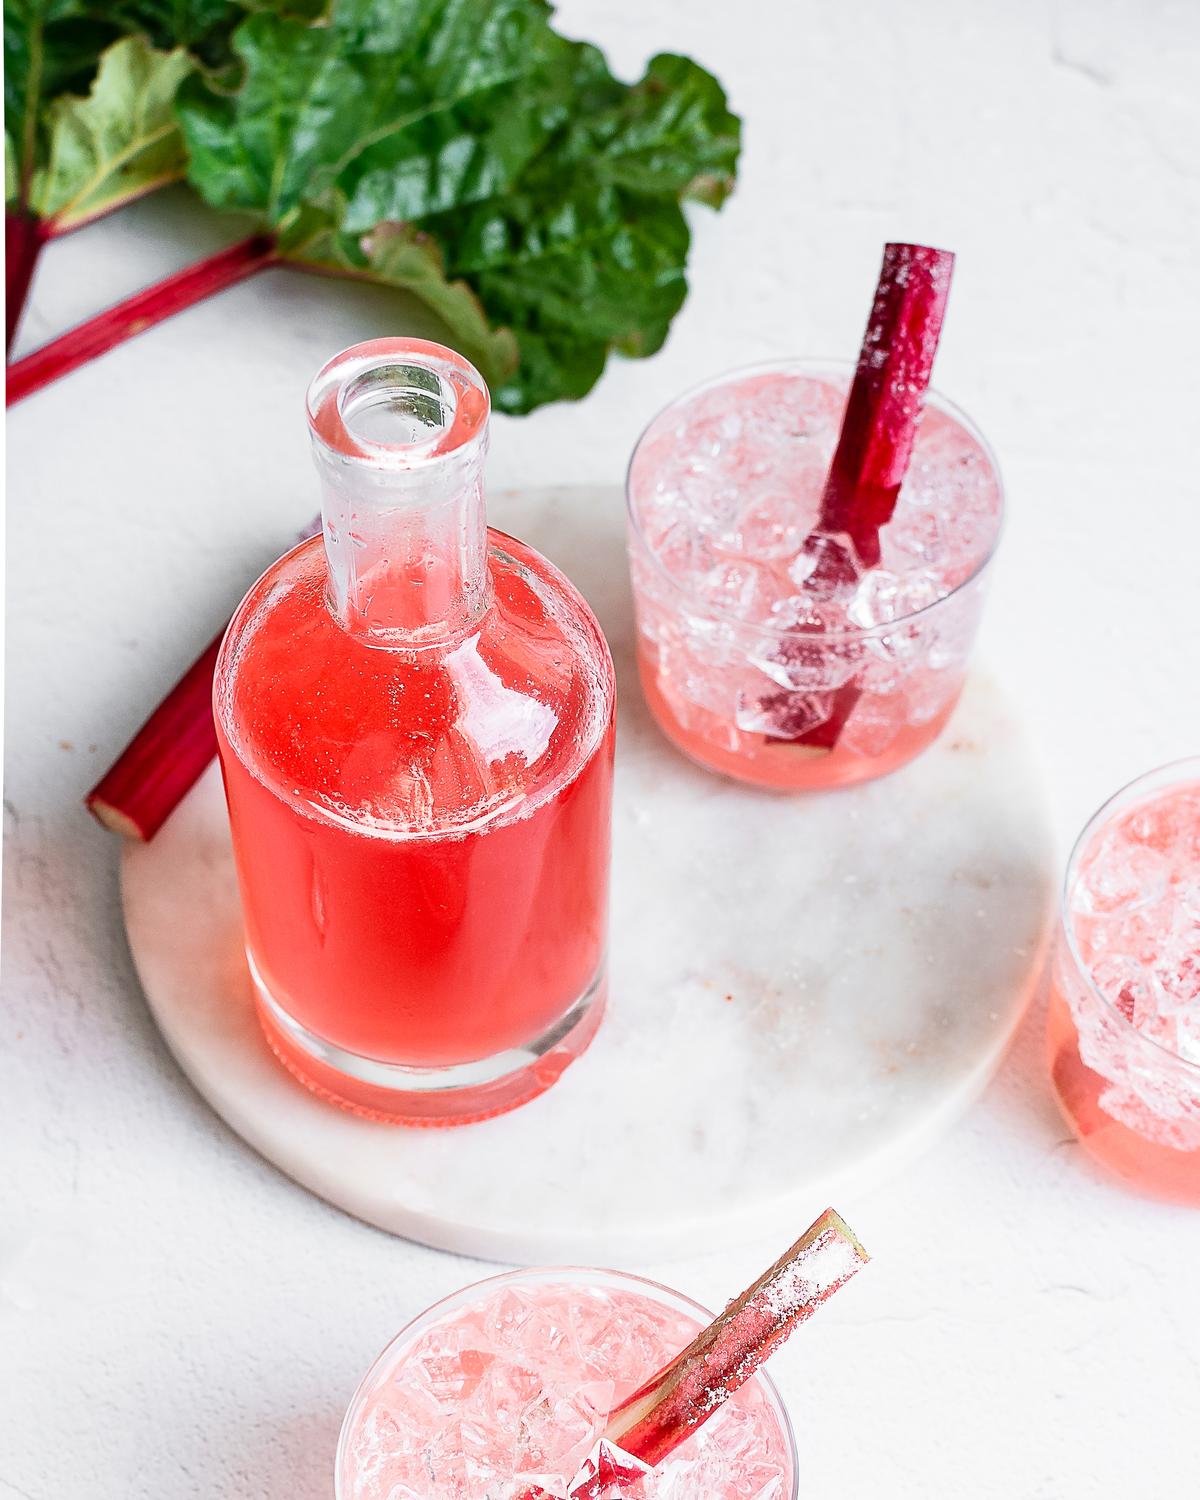 You can make a shrub with just about any fruit, but this pretty pink rhubarb version is a simple way to use up all the rhubarb in your garden. Use bright red rhubarb, diced small, and white wine vinegar; mint, cardamom, and ginger are all nice additions. (Jennifer McGruther)